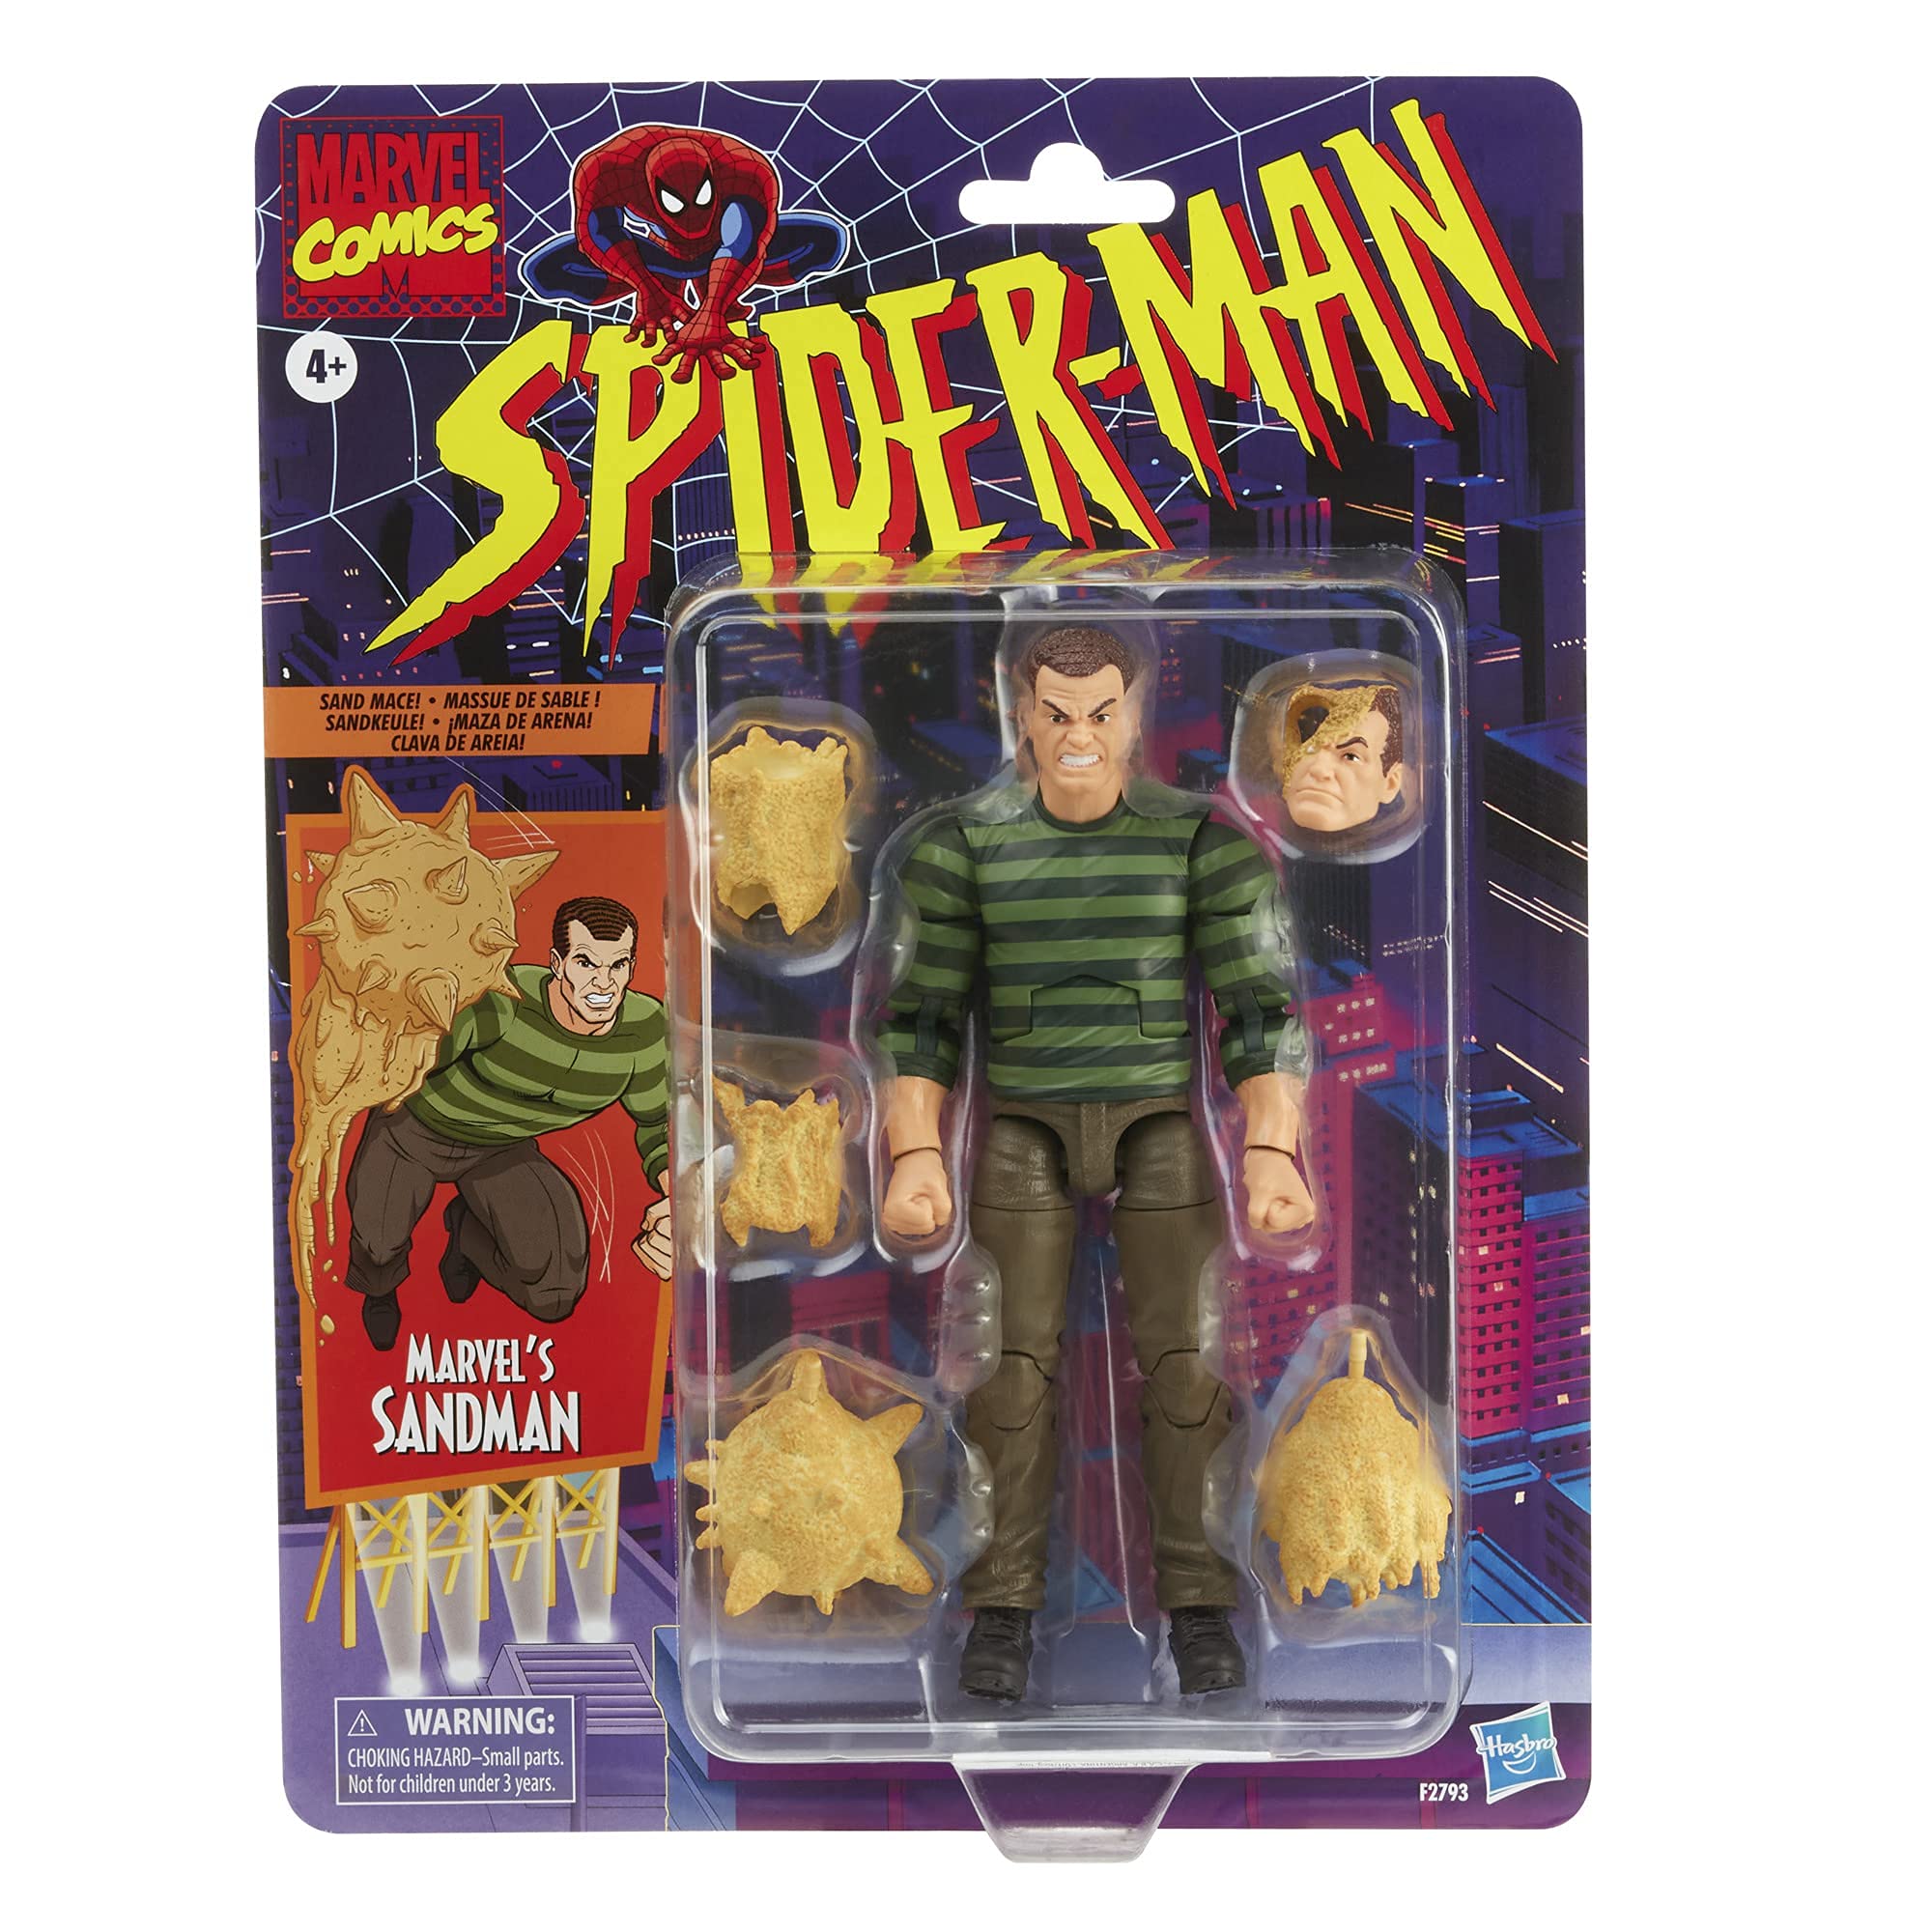 Spider-Man Hasbro Marvel Legends Series 6-inch Scale Action Figure Toy Marvel’s Sandman, Includes Premium Design, and 5 Accessories